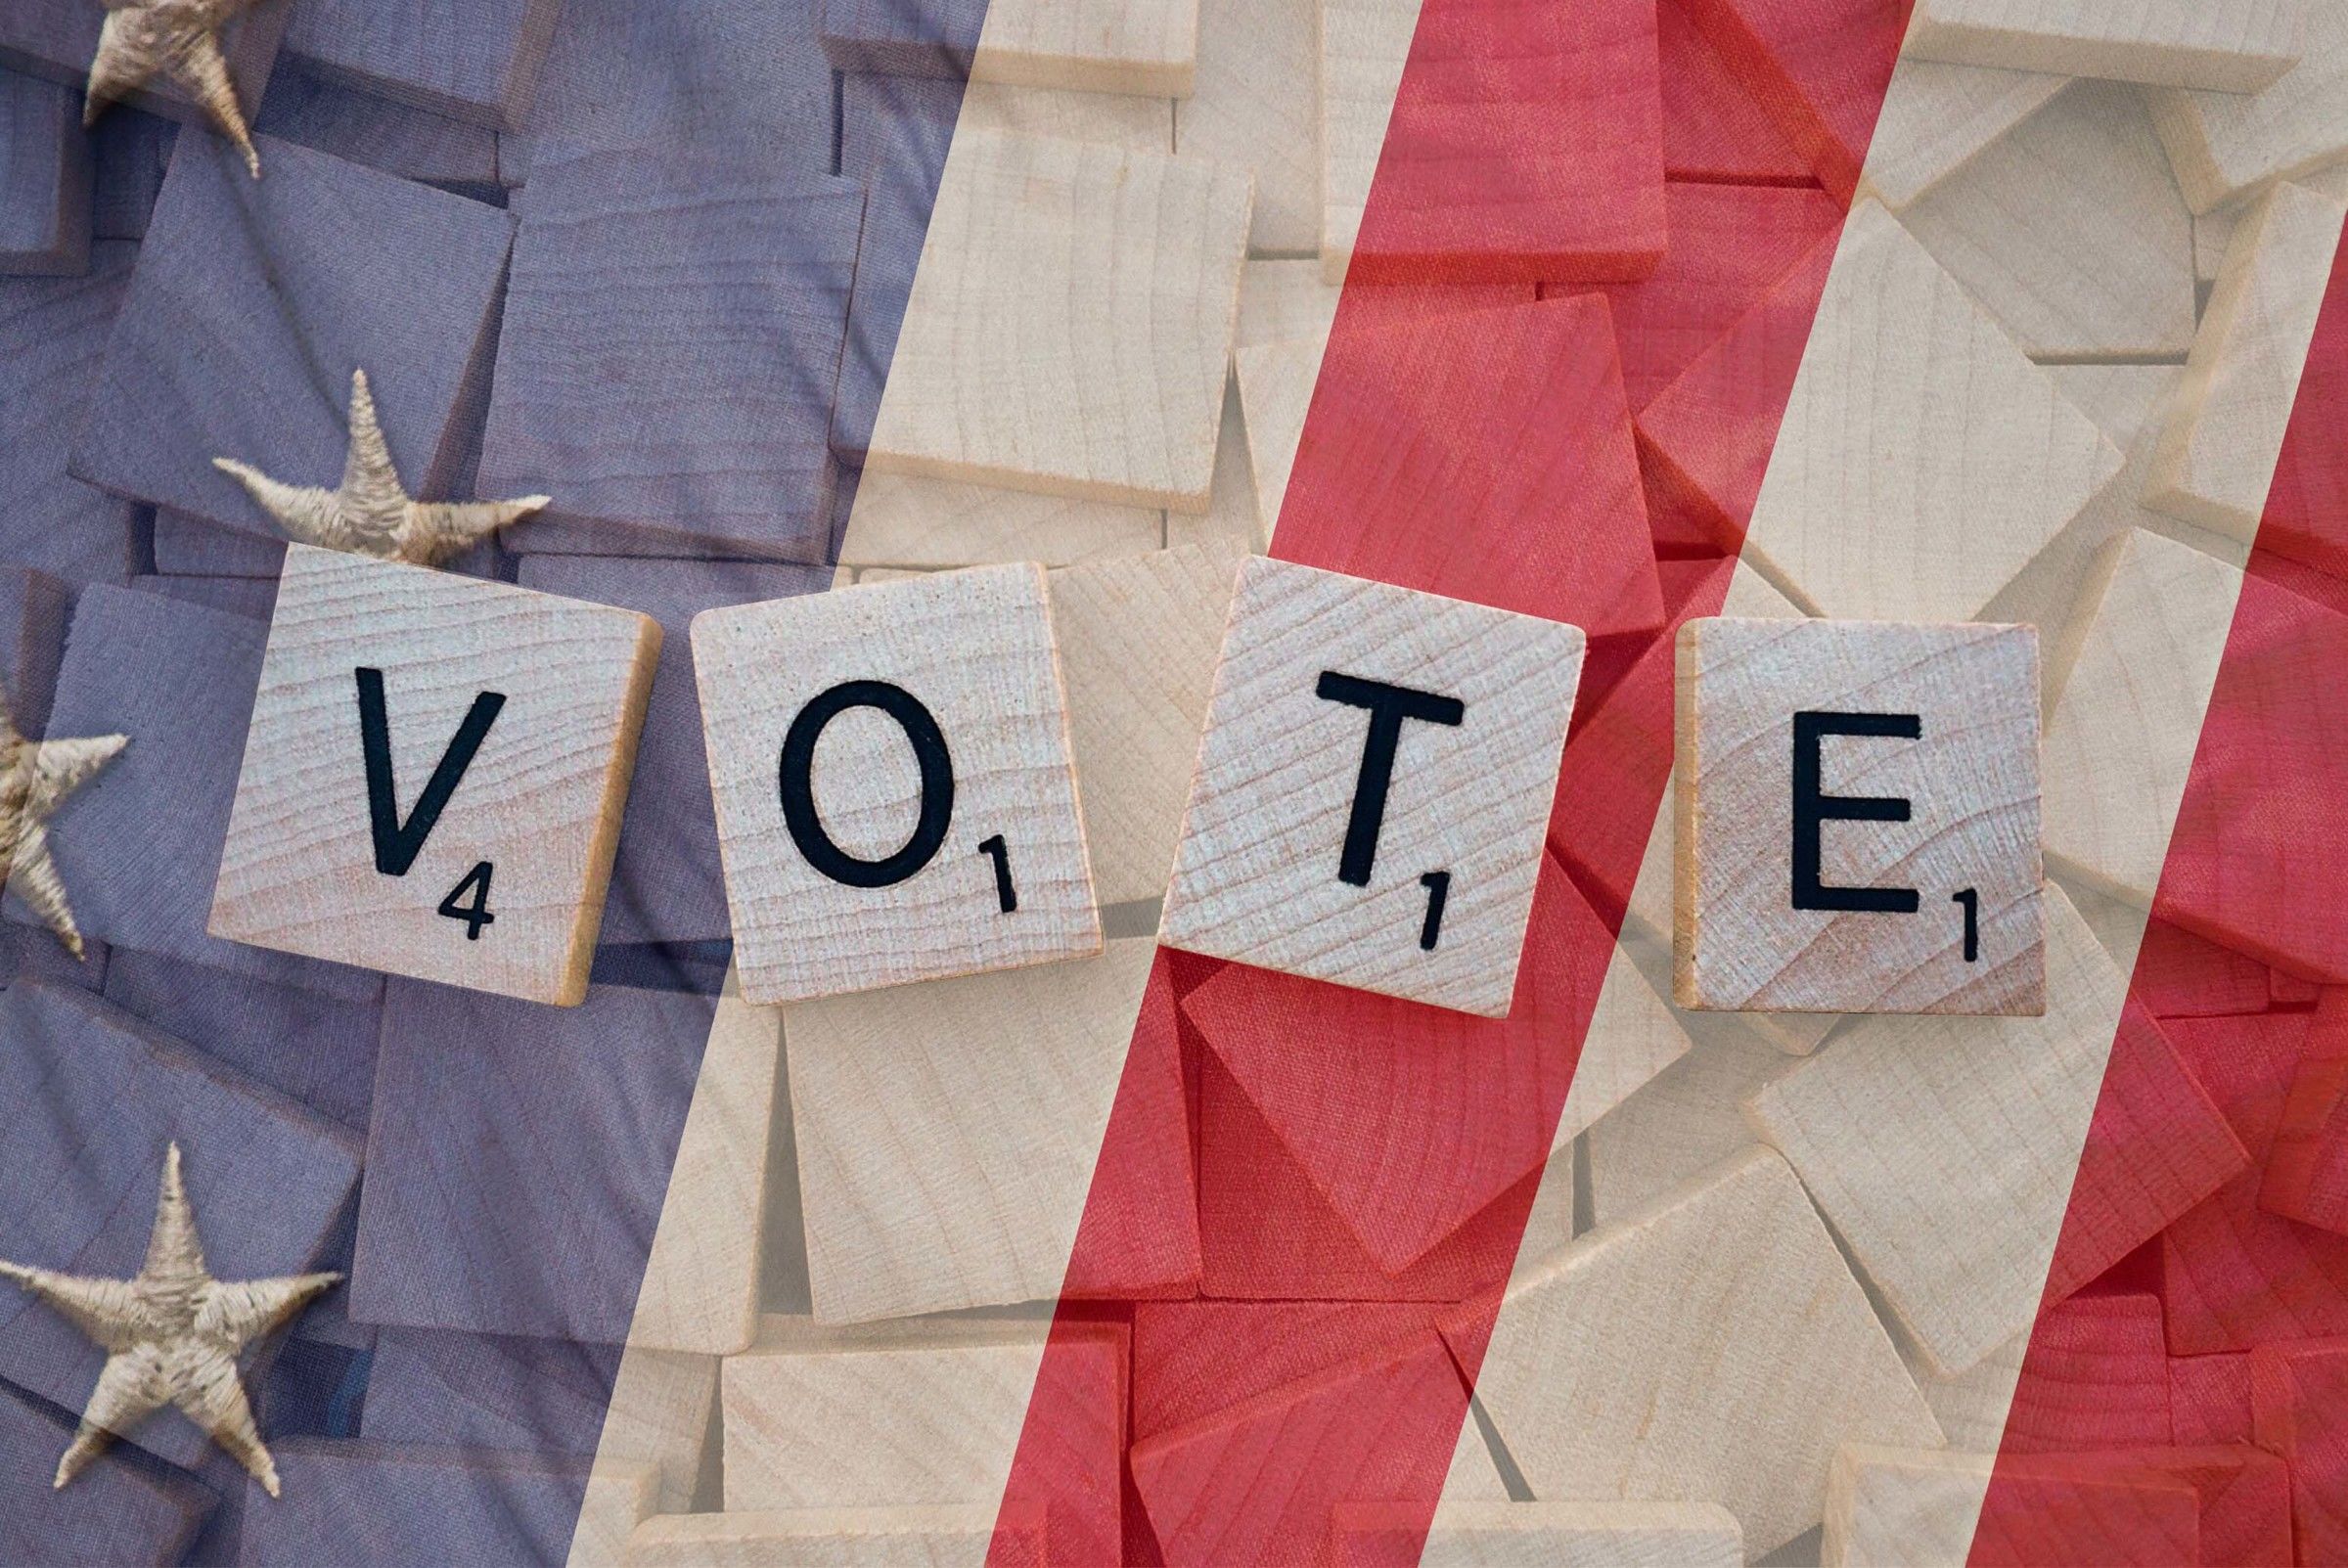 scrabble letters spelling “vote” with american flag in the background